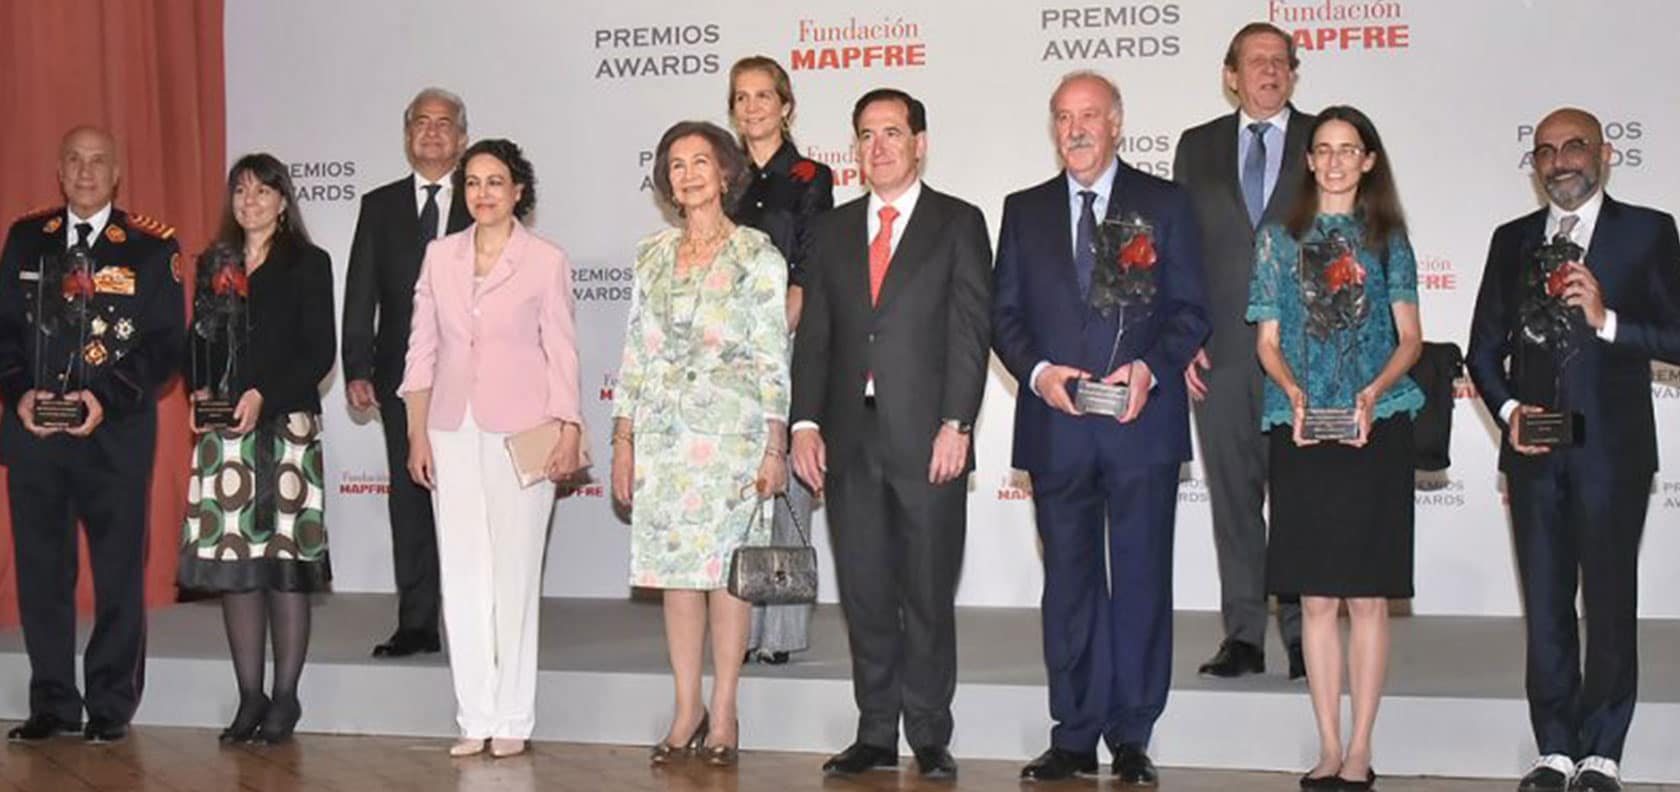 Mapfre Social Awards ceremony with Spanish personalities including Consort Queen of Spain Sofía of Greece, The Infanta Elena de Borbón or the former national soccer coach in Spain, Vicente del Bosque.